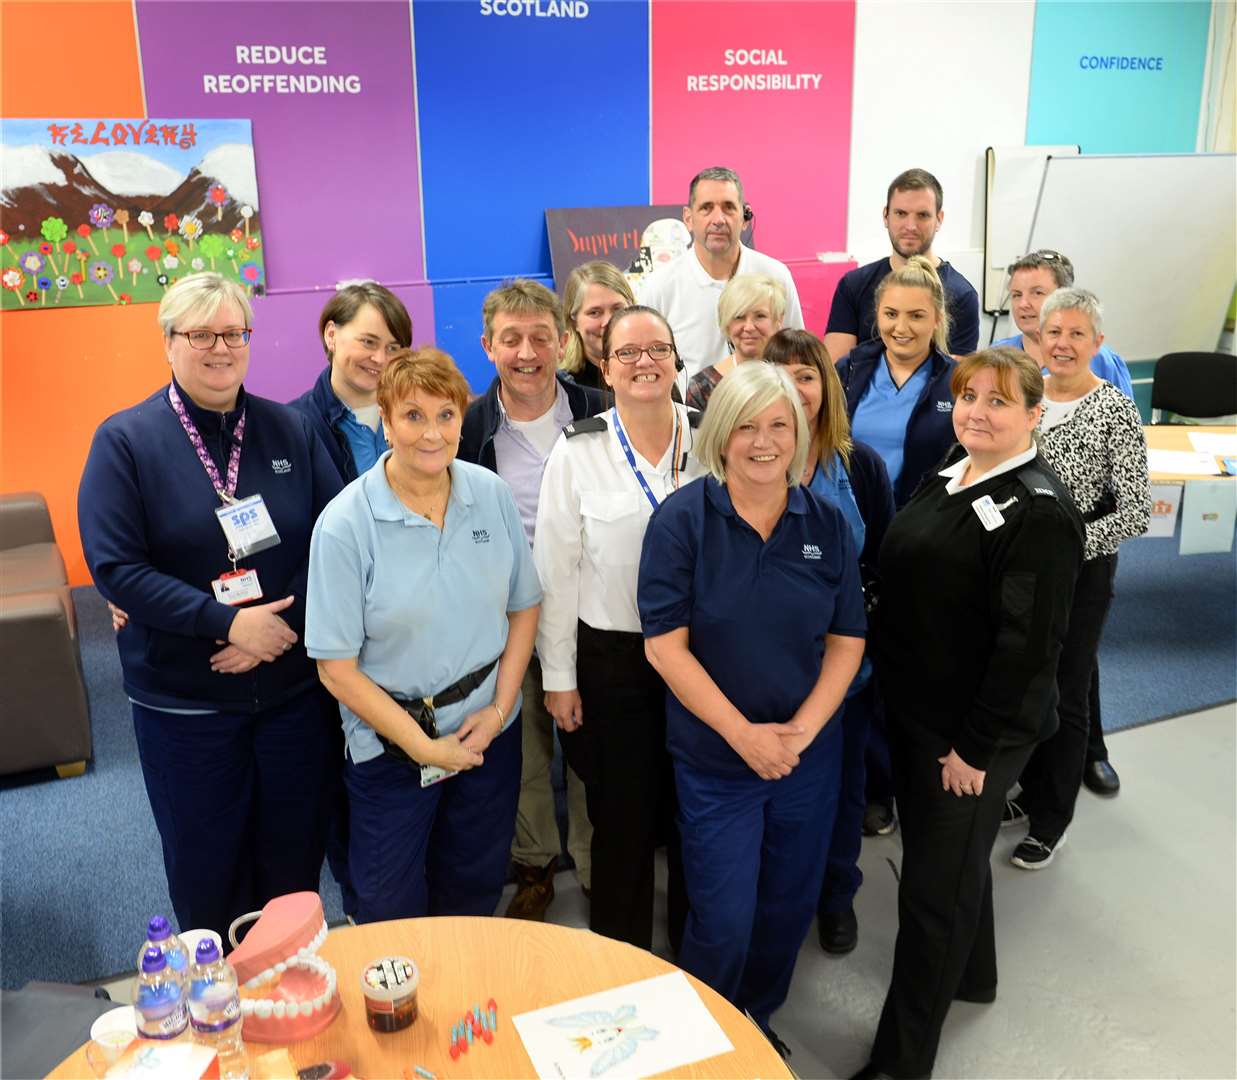 A health and wellbeing day at Inverness Prison offered advice from the NHS, Salvation Army, Scottish Prison Service and LGOWIT group for people living with long-term conditions.